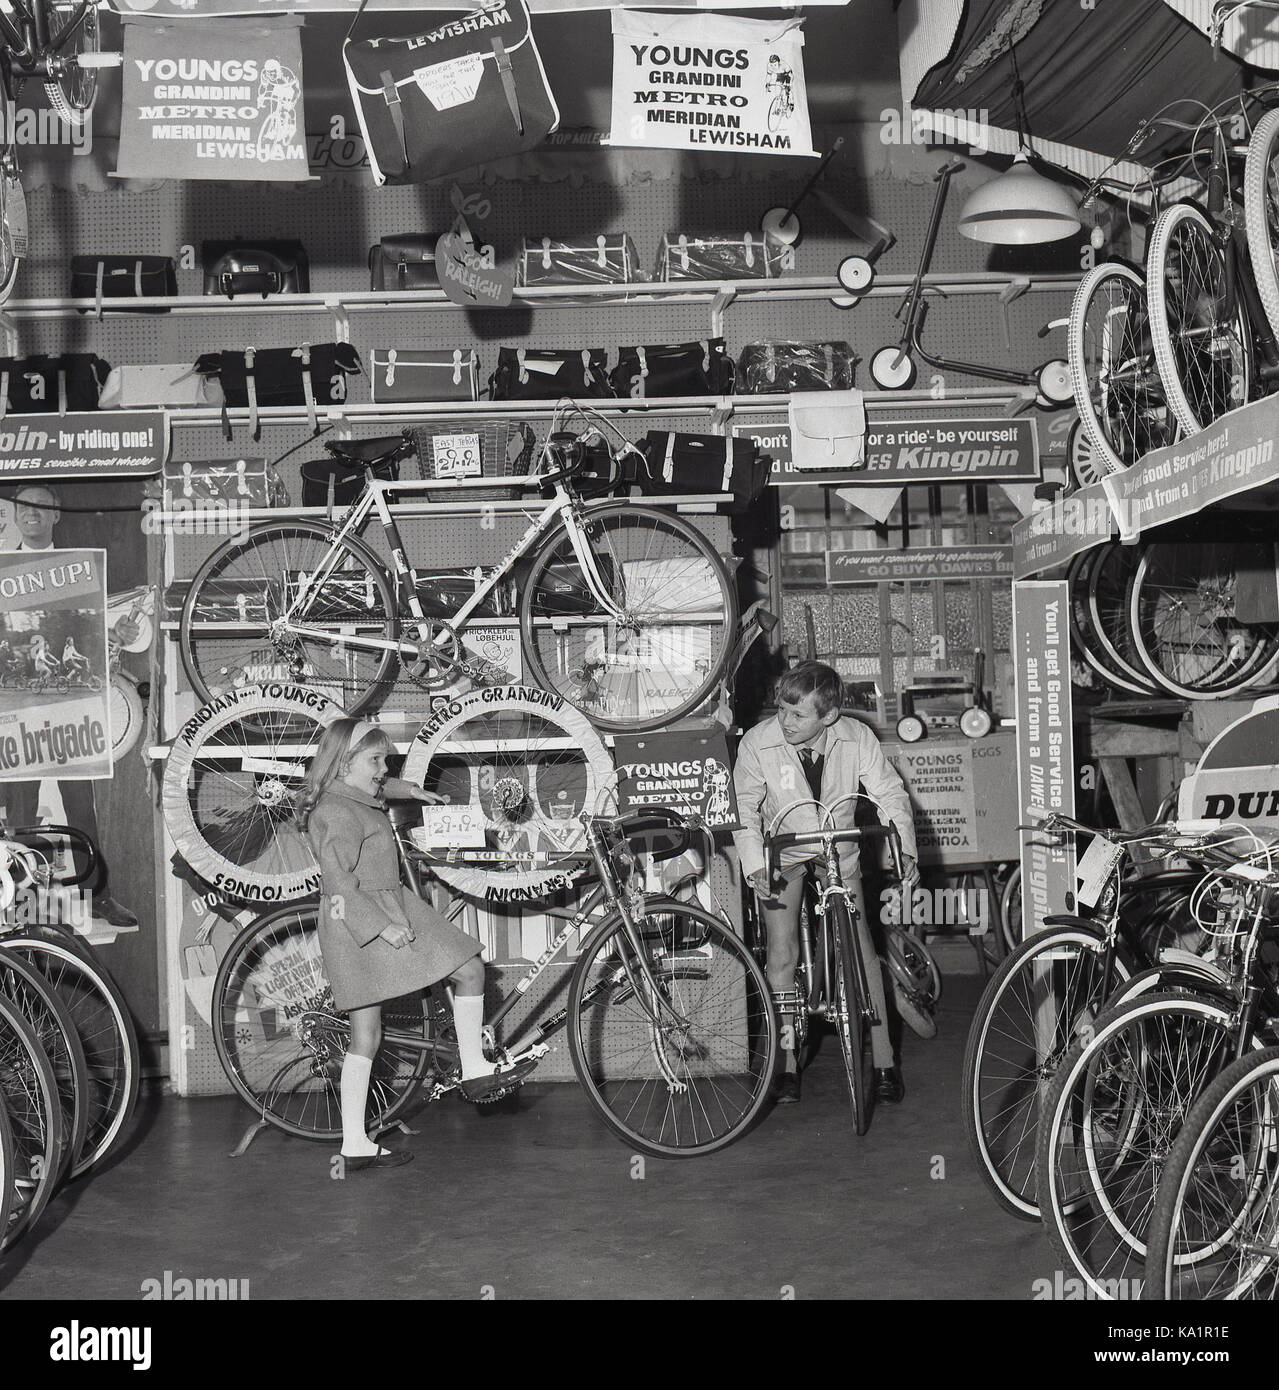 1970s, historical, an exited young boy with sister looking on, sits on one of the racing bikes on display inside the showroom Youngs lightweight cycle shop, Lewisham, South London, England, UK. Stock Photo